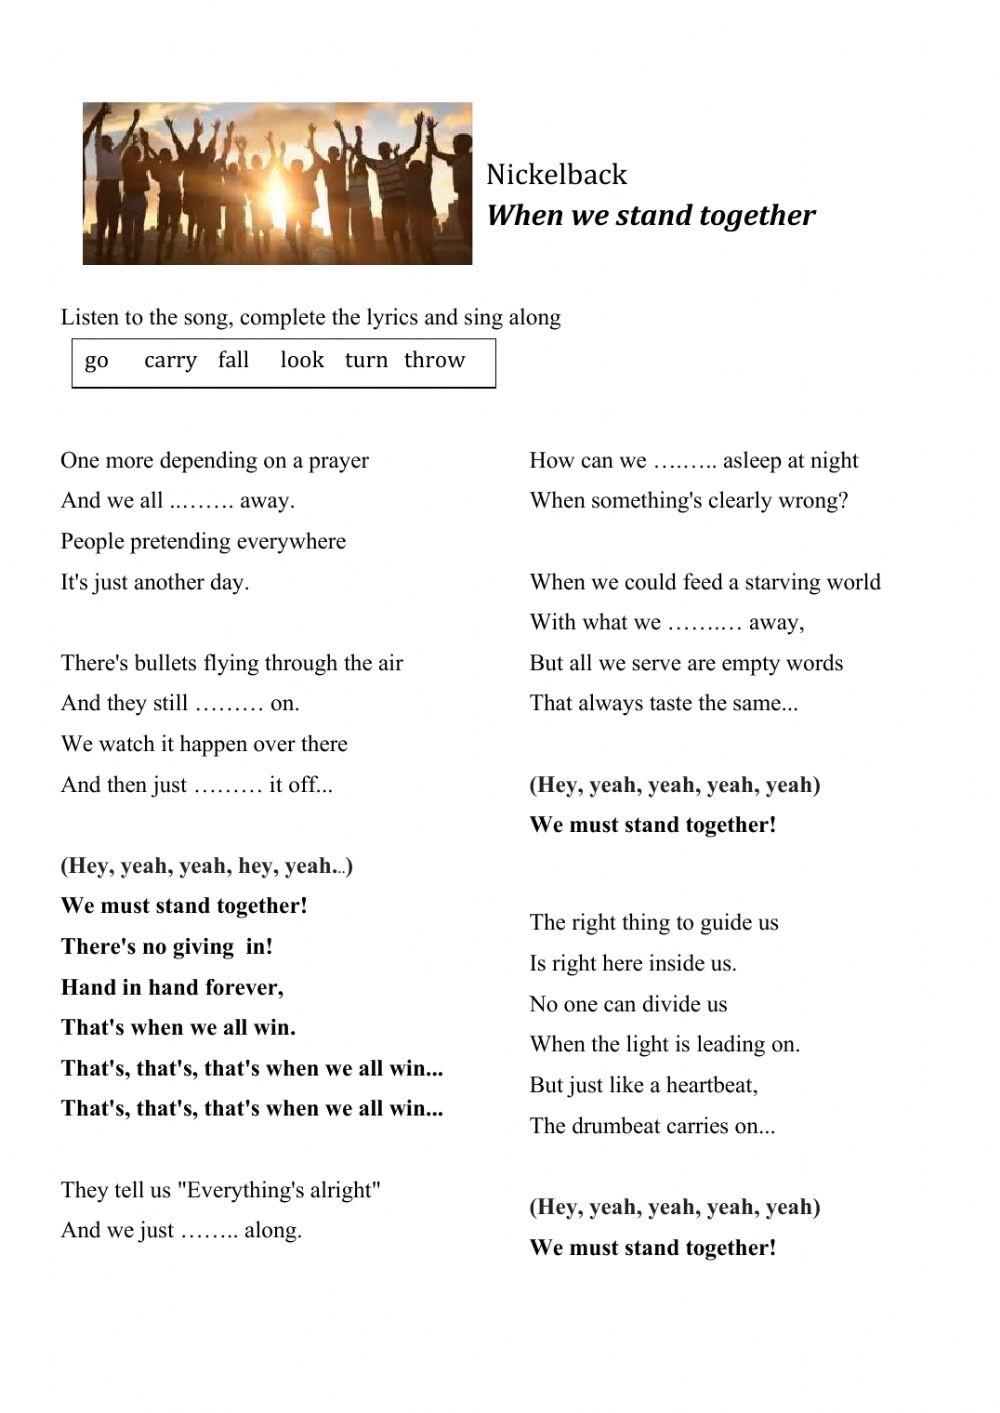 When we stand together, song and lyrics online exercise for | Live  Worksheets